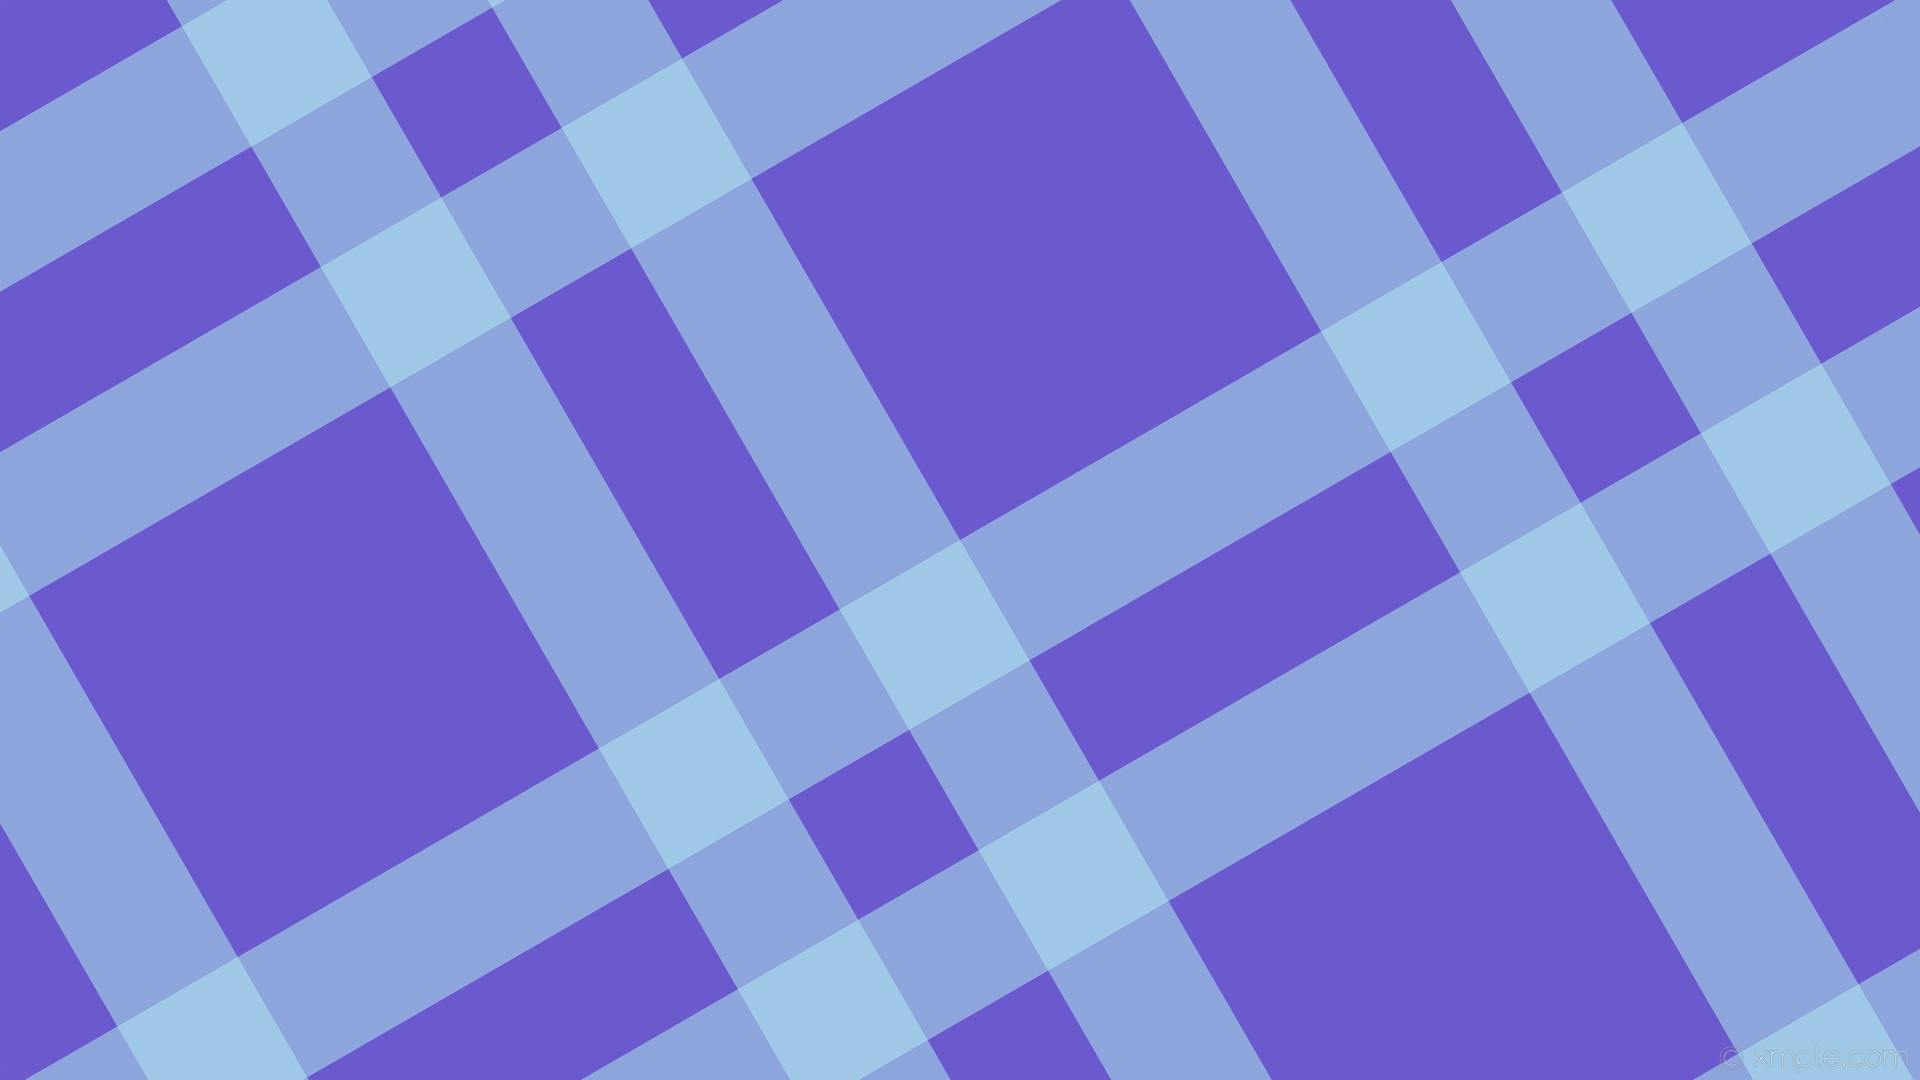 1920x1080 wallpaper striped gingham dual purple blue slate blue pale turquoise  #6a5acd #afeeee 300Â°